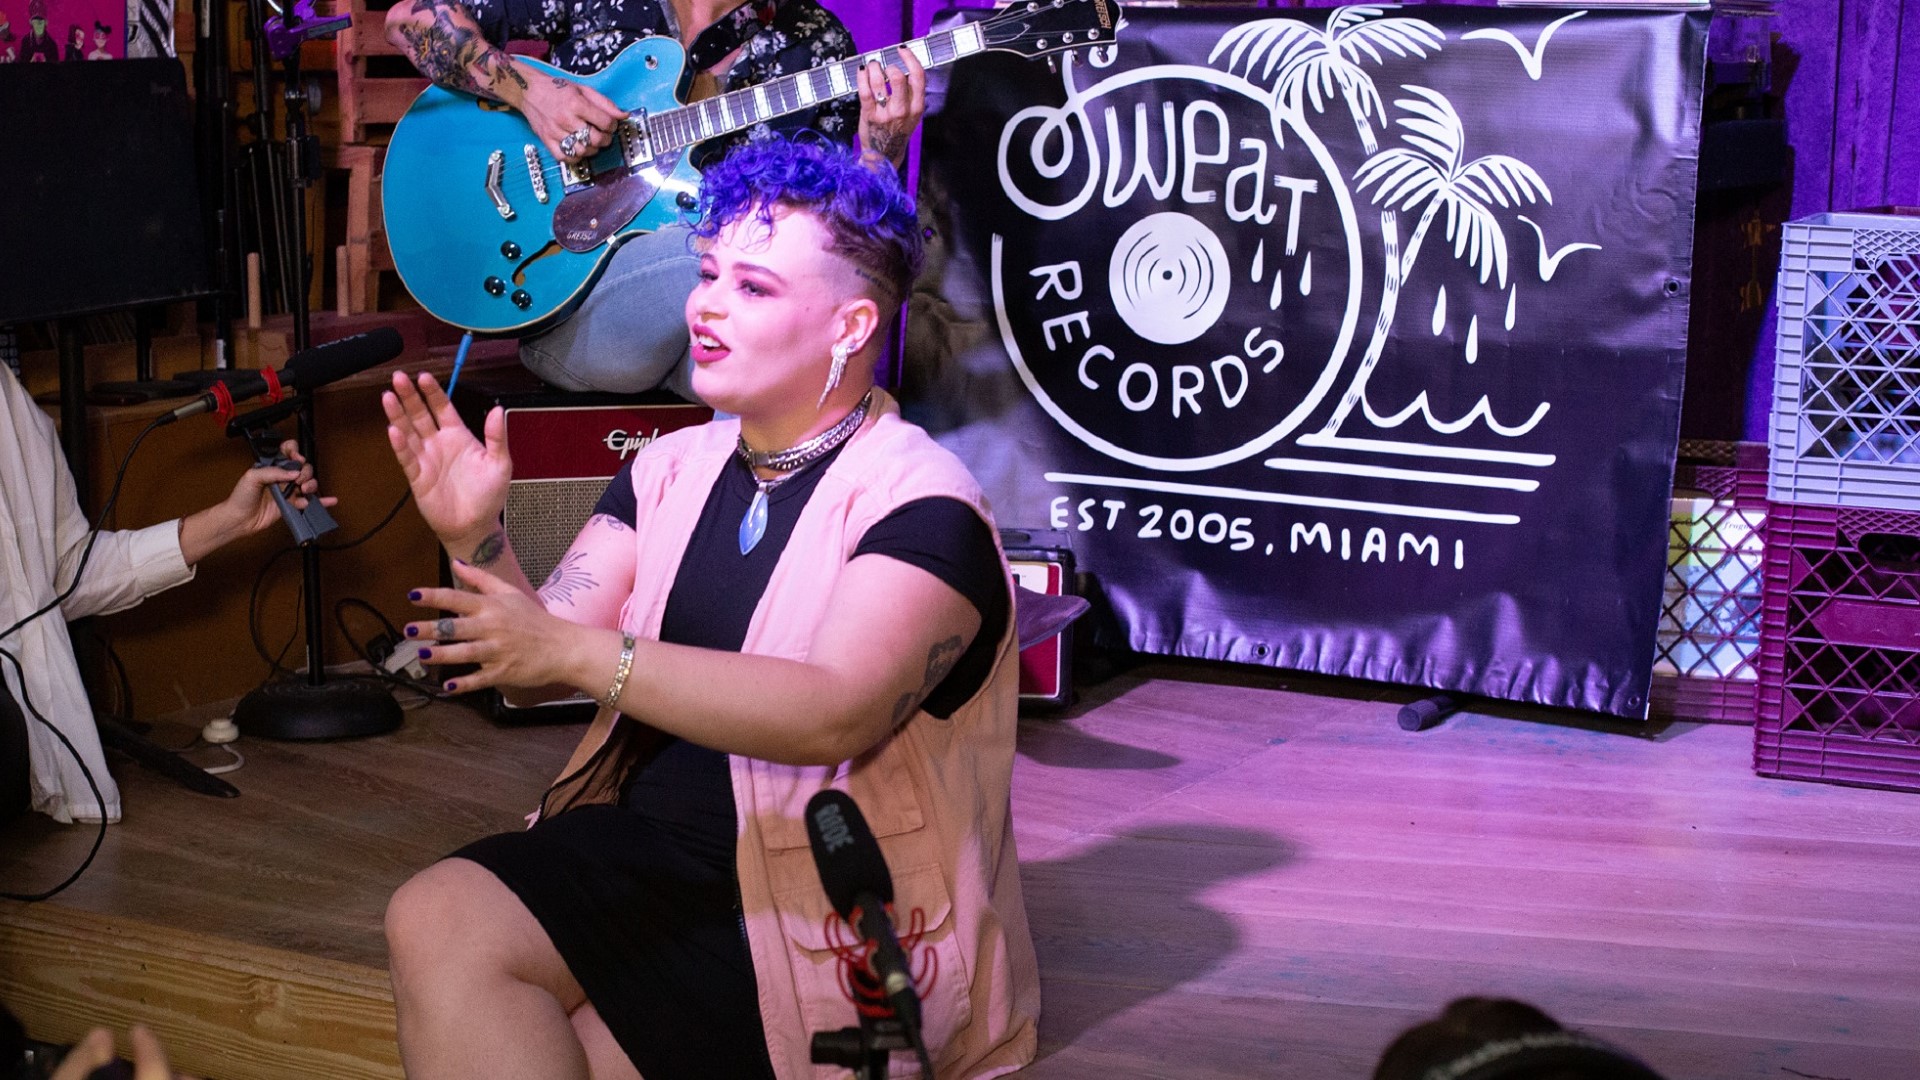 Yoli Mayor performing at Sweat Records in Miami for Tigre Sounds